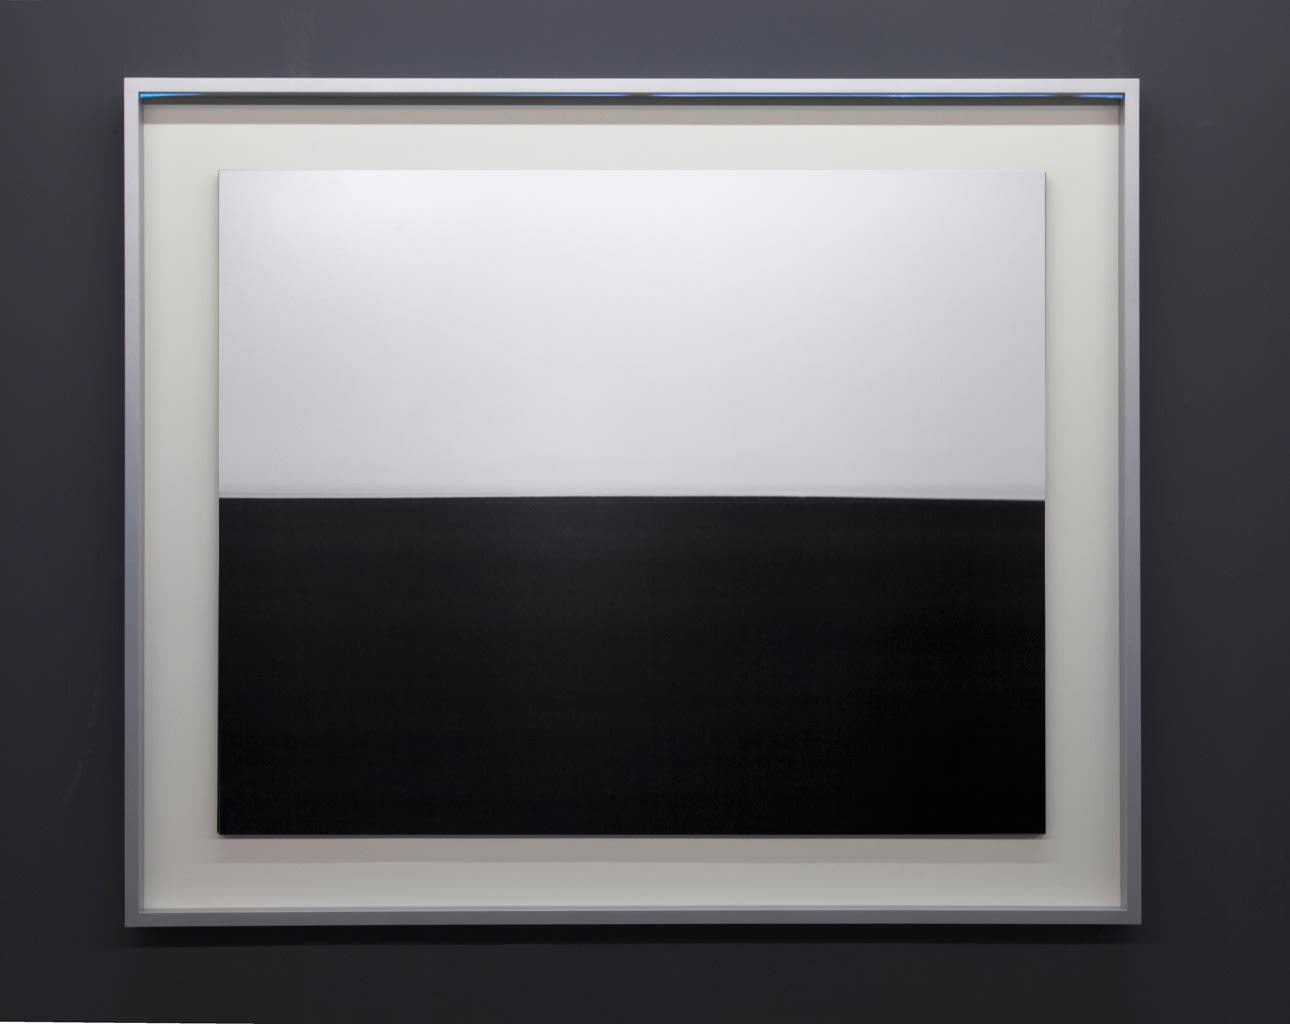 Isabelle Le Minh, Darkroomscapes, after Hiroshi Sugimoto | Ansco 130, 2012